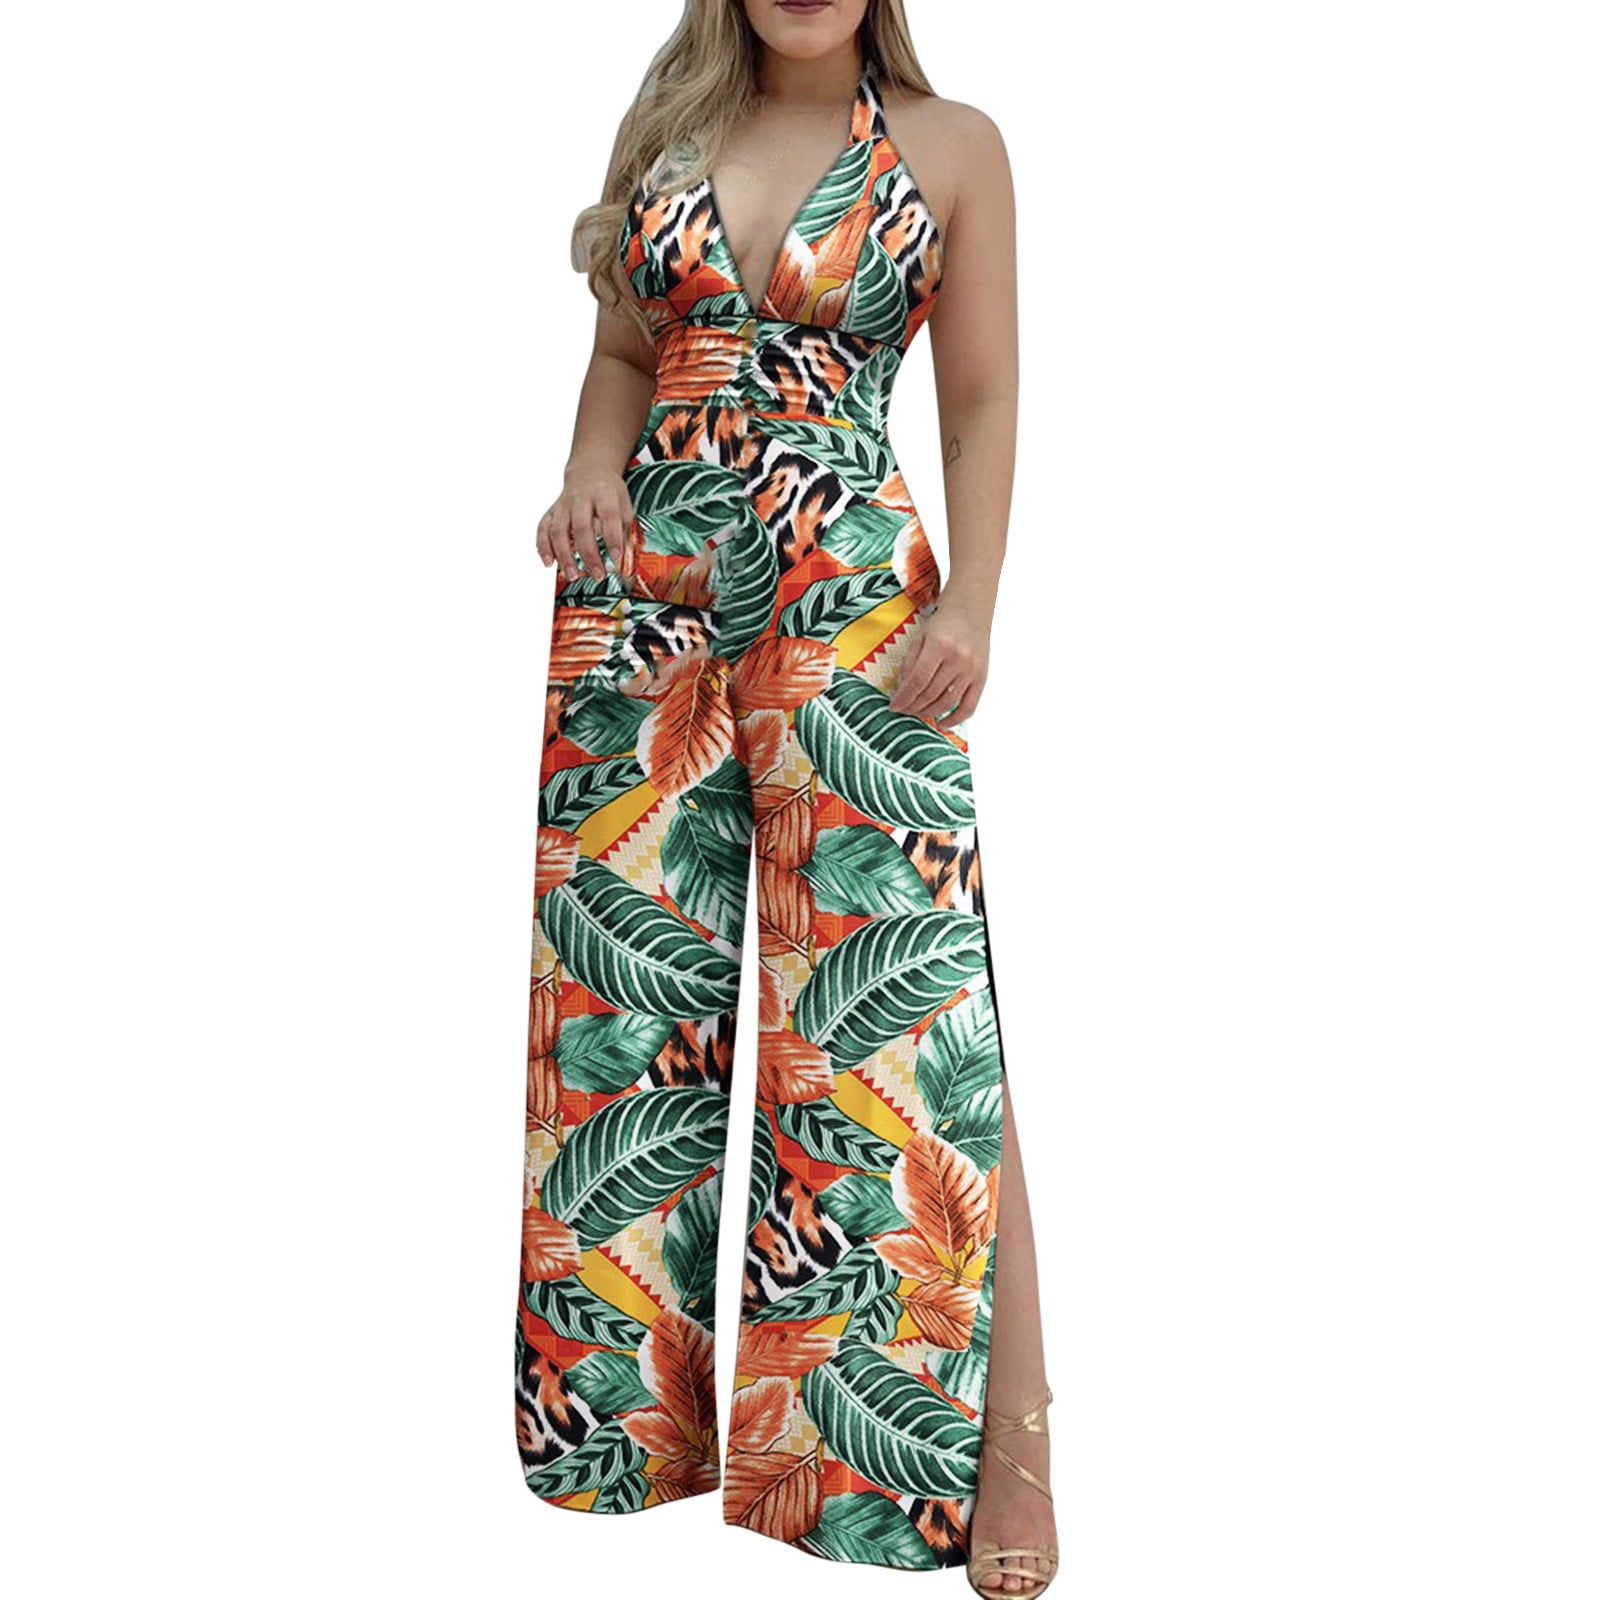 KINGOL Women Summer Fashion Casual Holiday Wide Leg Pants Long Jumpsuit Backless Strappy Playsuit